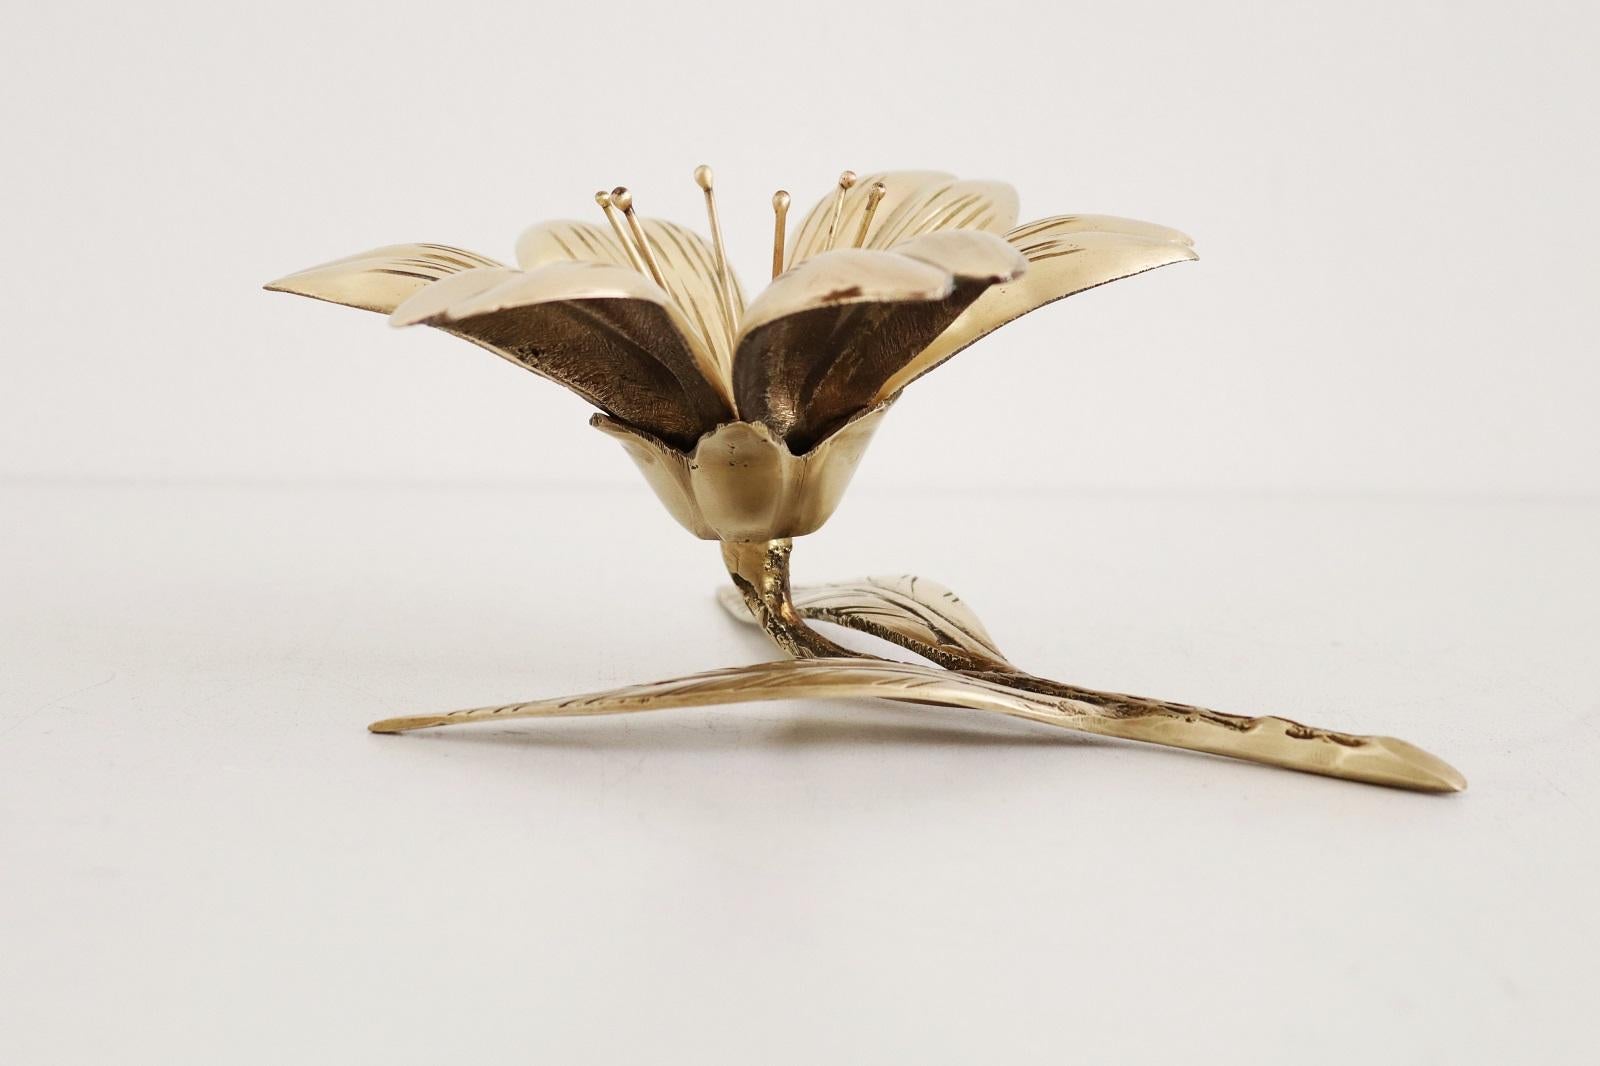 Italian Midcentury Flower in Brass with Petal Ashtrays for Cigarettes, 1950s 2